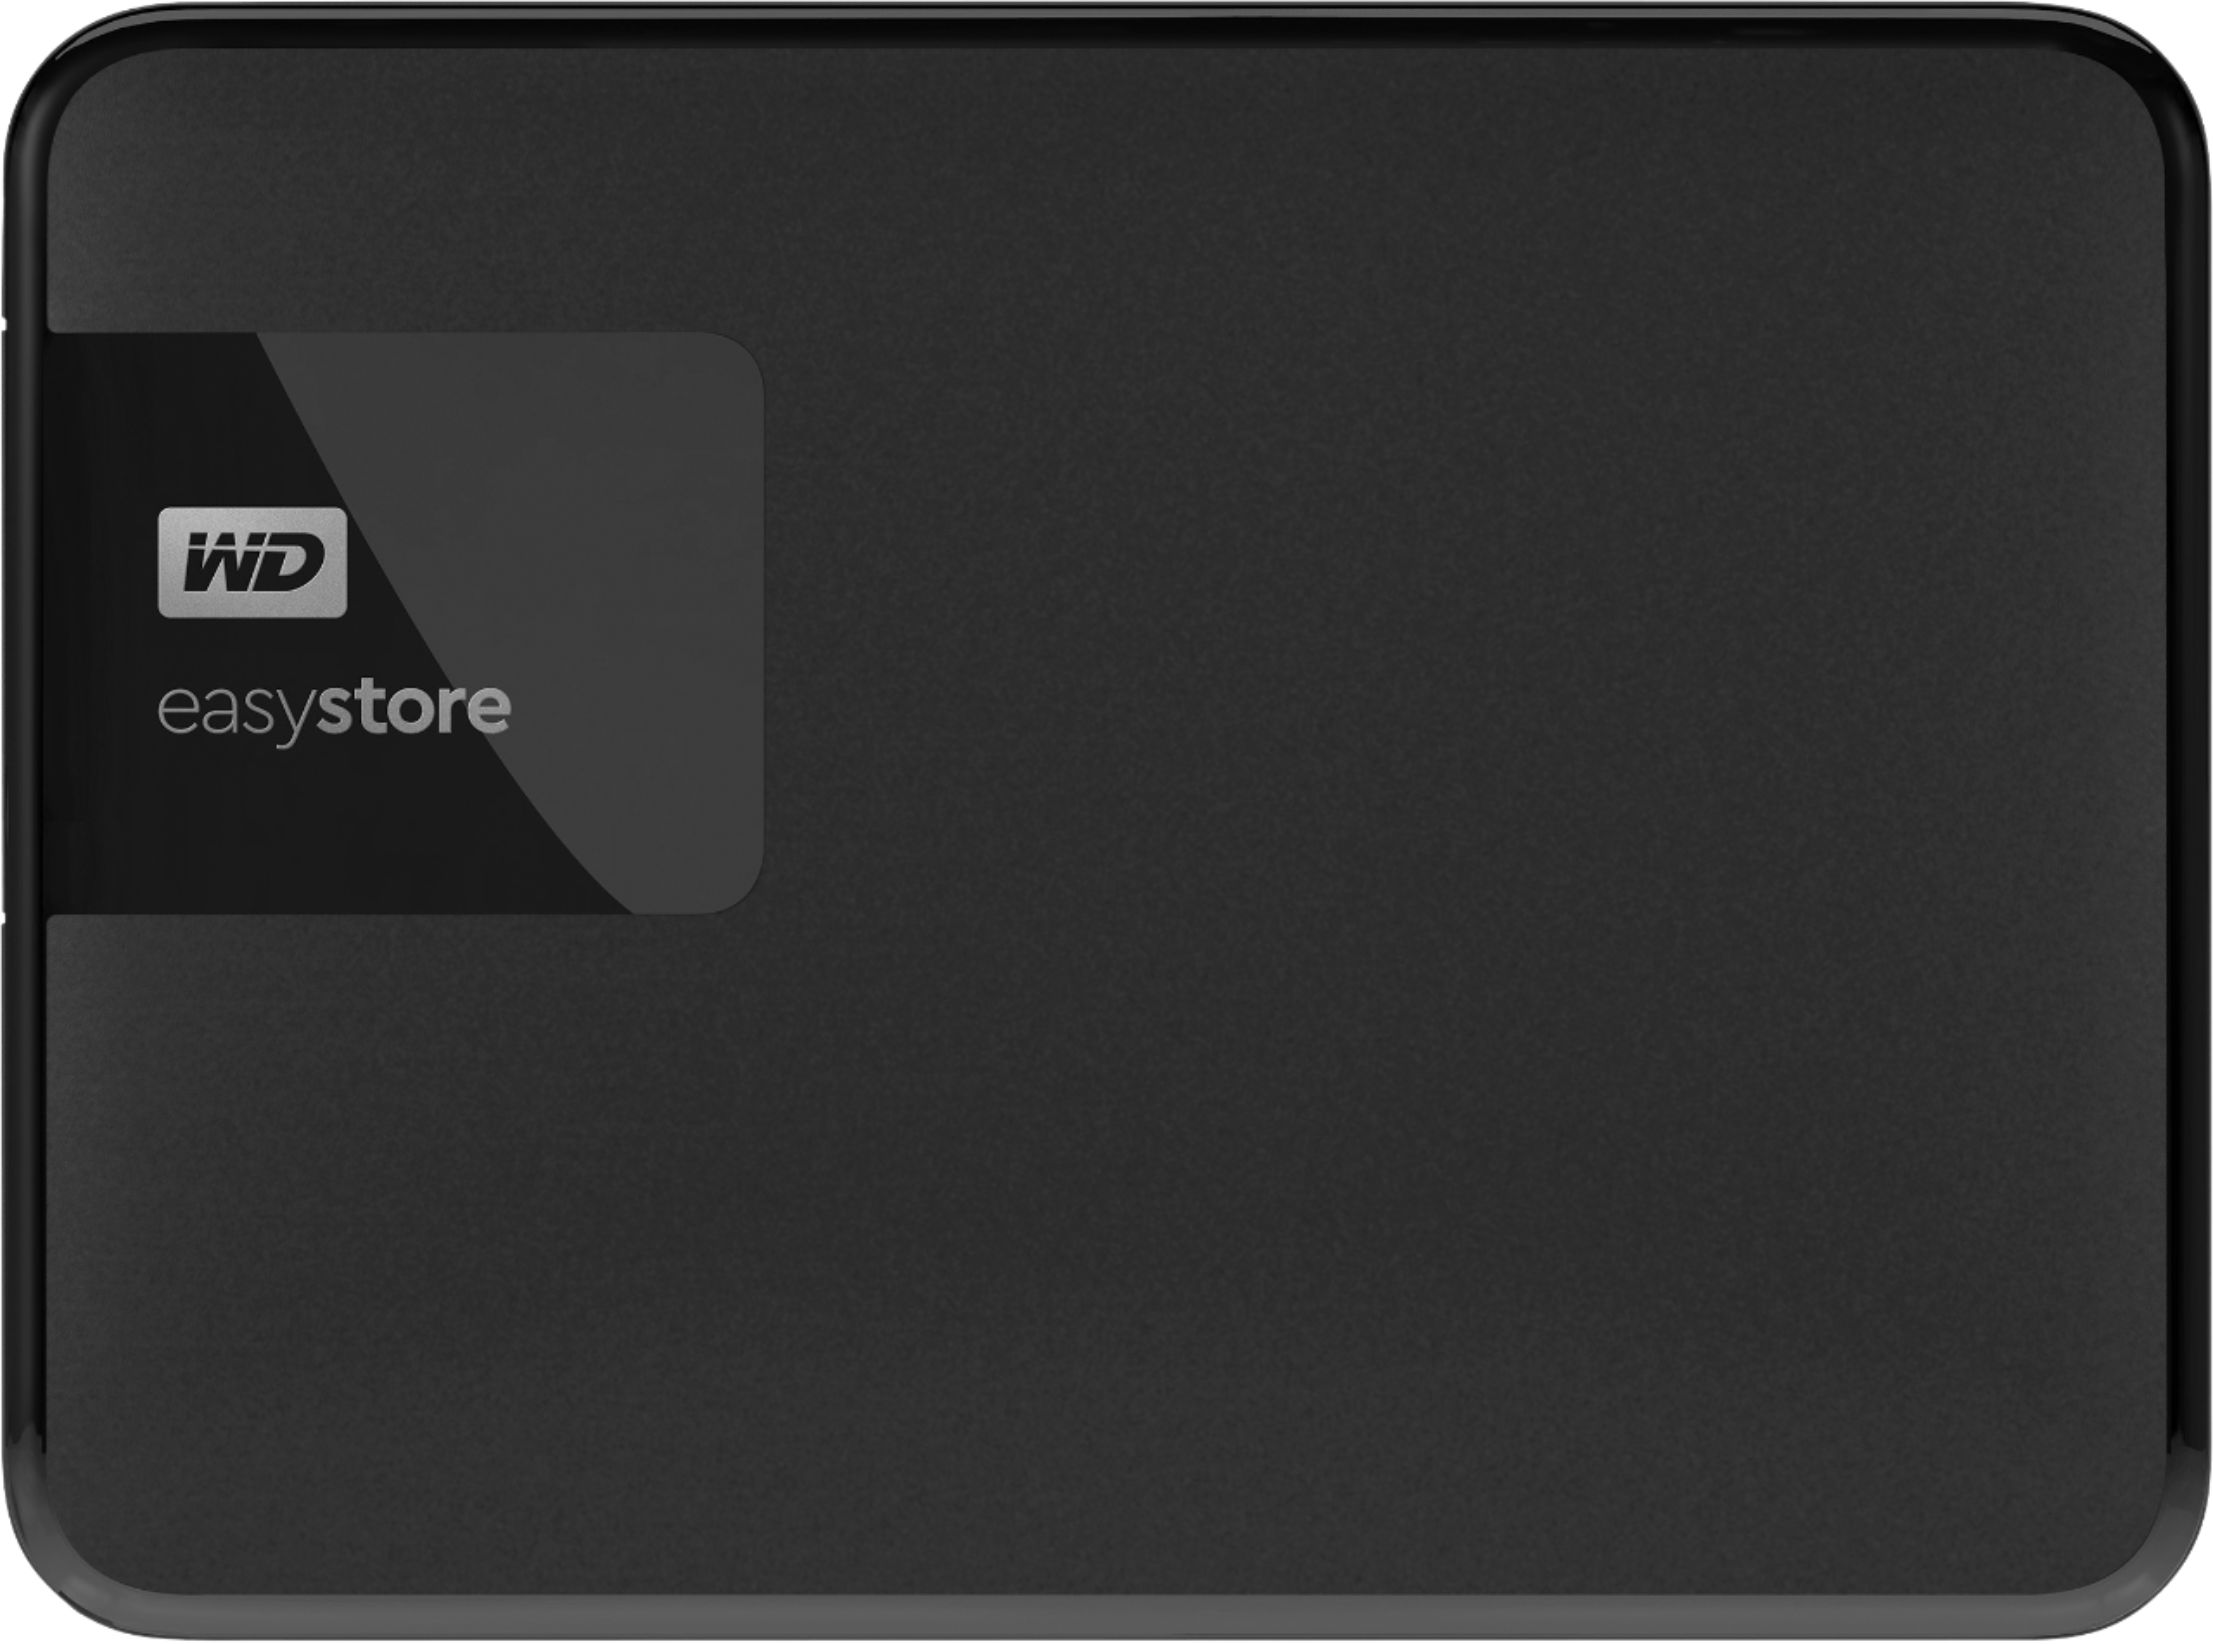 wd easystore for xbox one